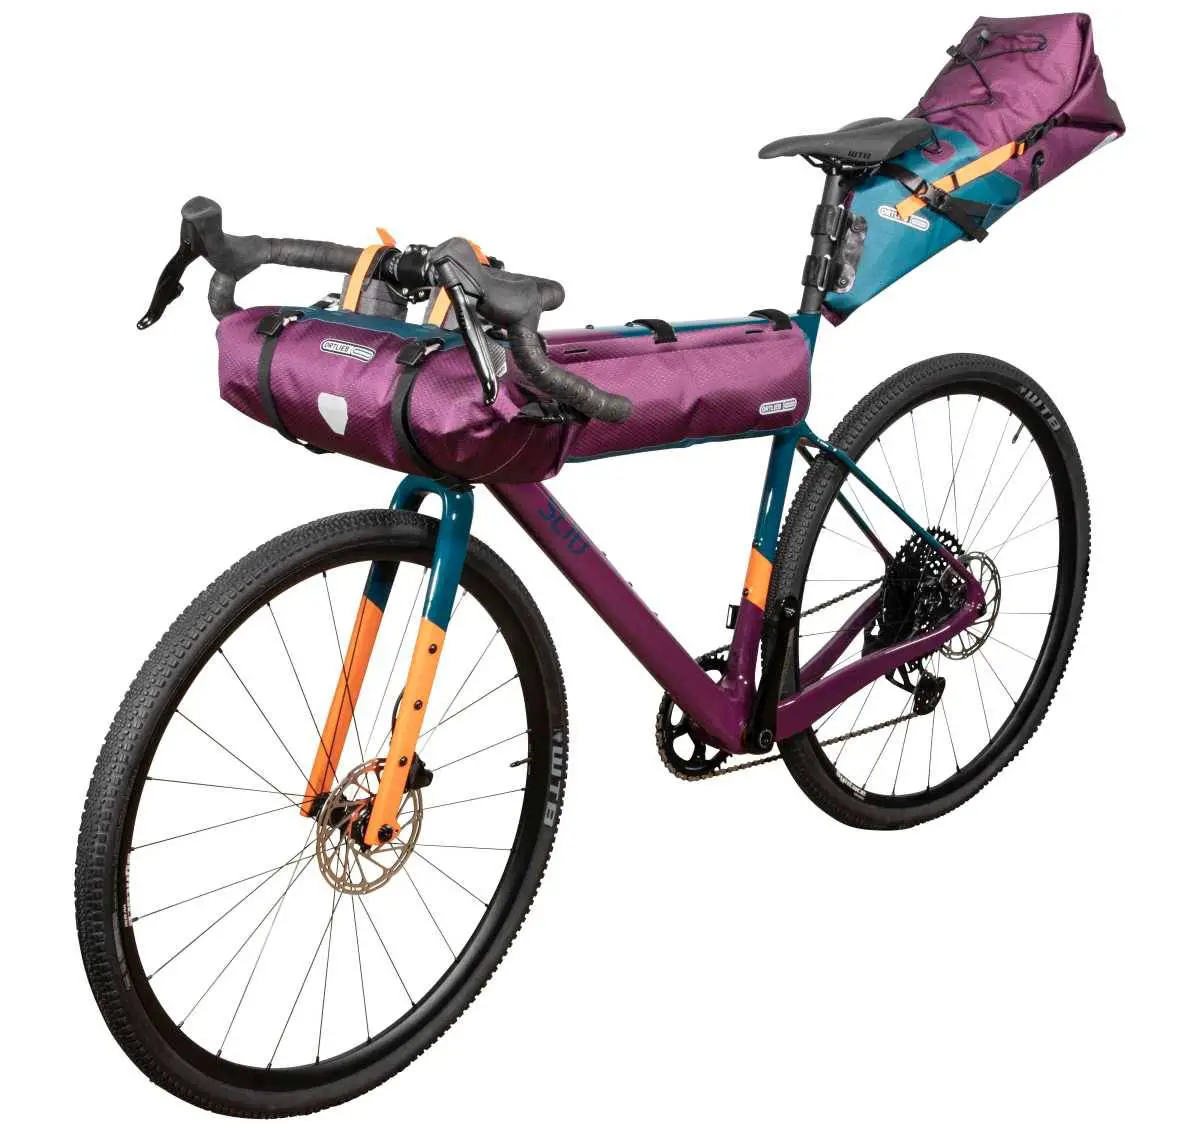 Press Release: Ortlieb releases Limited-Edition Bikepacking Bags ...